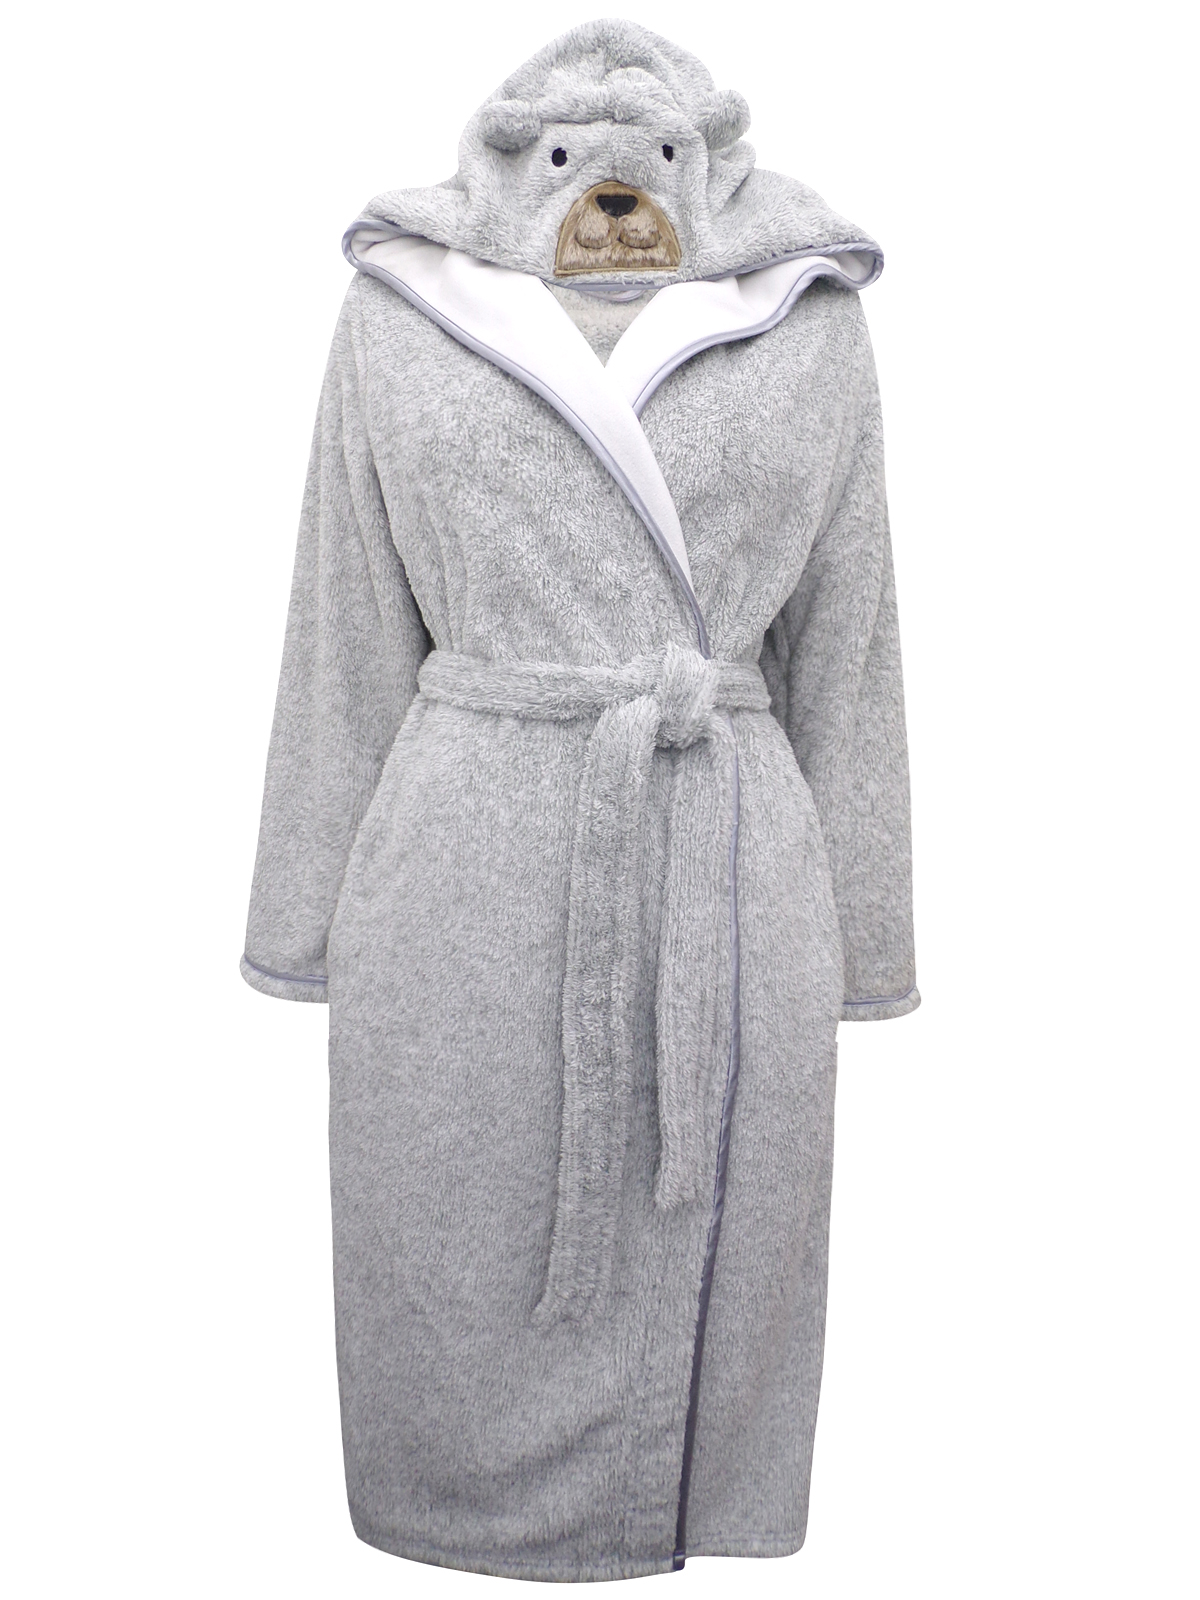 Marks and Spencer - - M&5 GREY Tatty Teddy Hooded Fleece Wrap Dressing Gown - Size 8/10 to 20/22